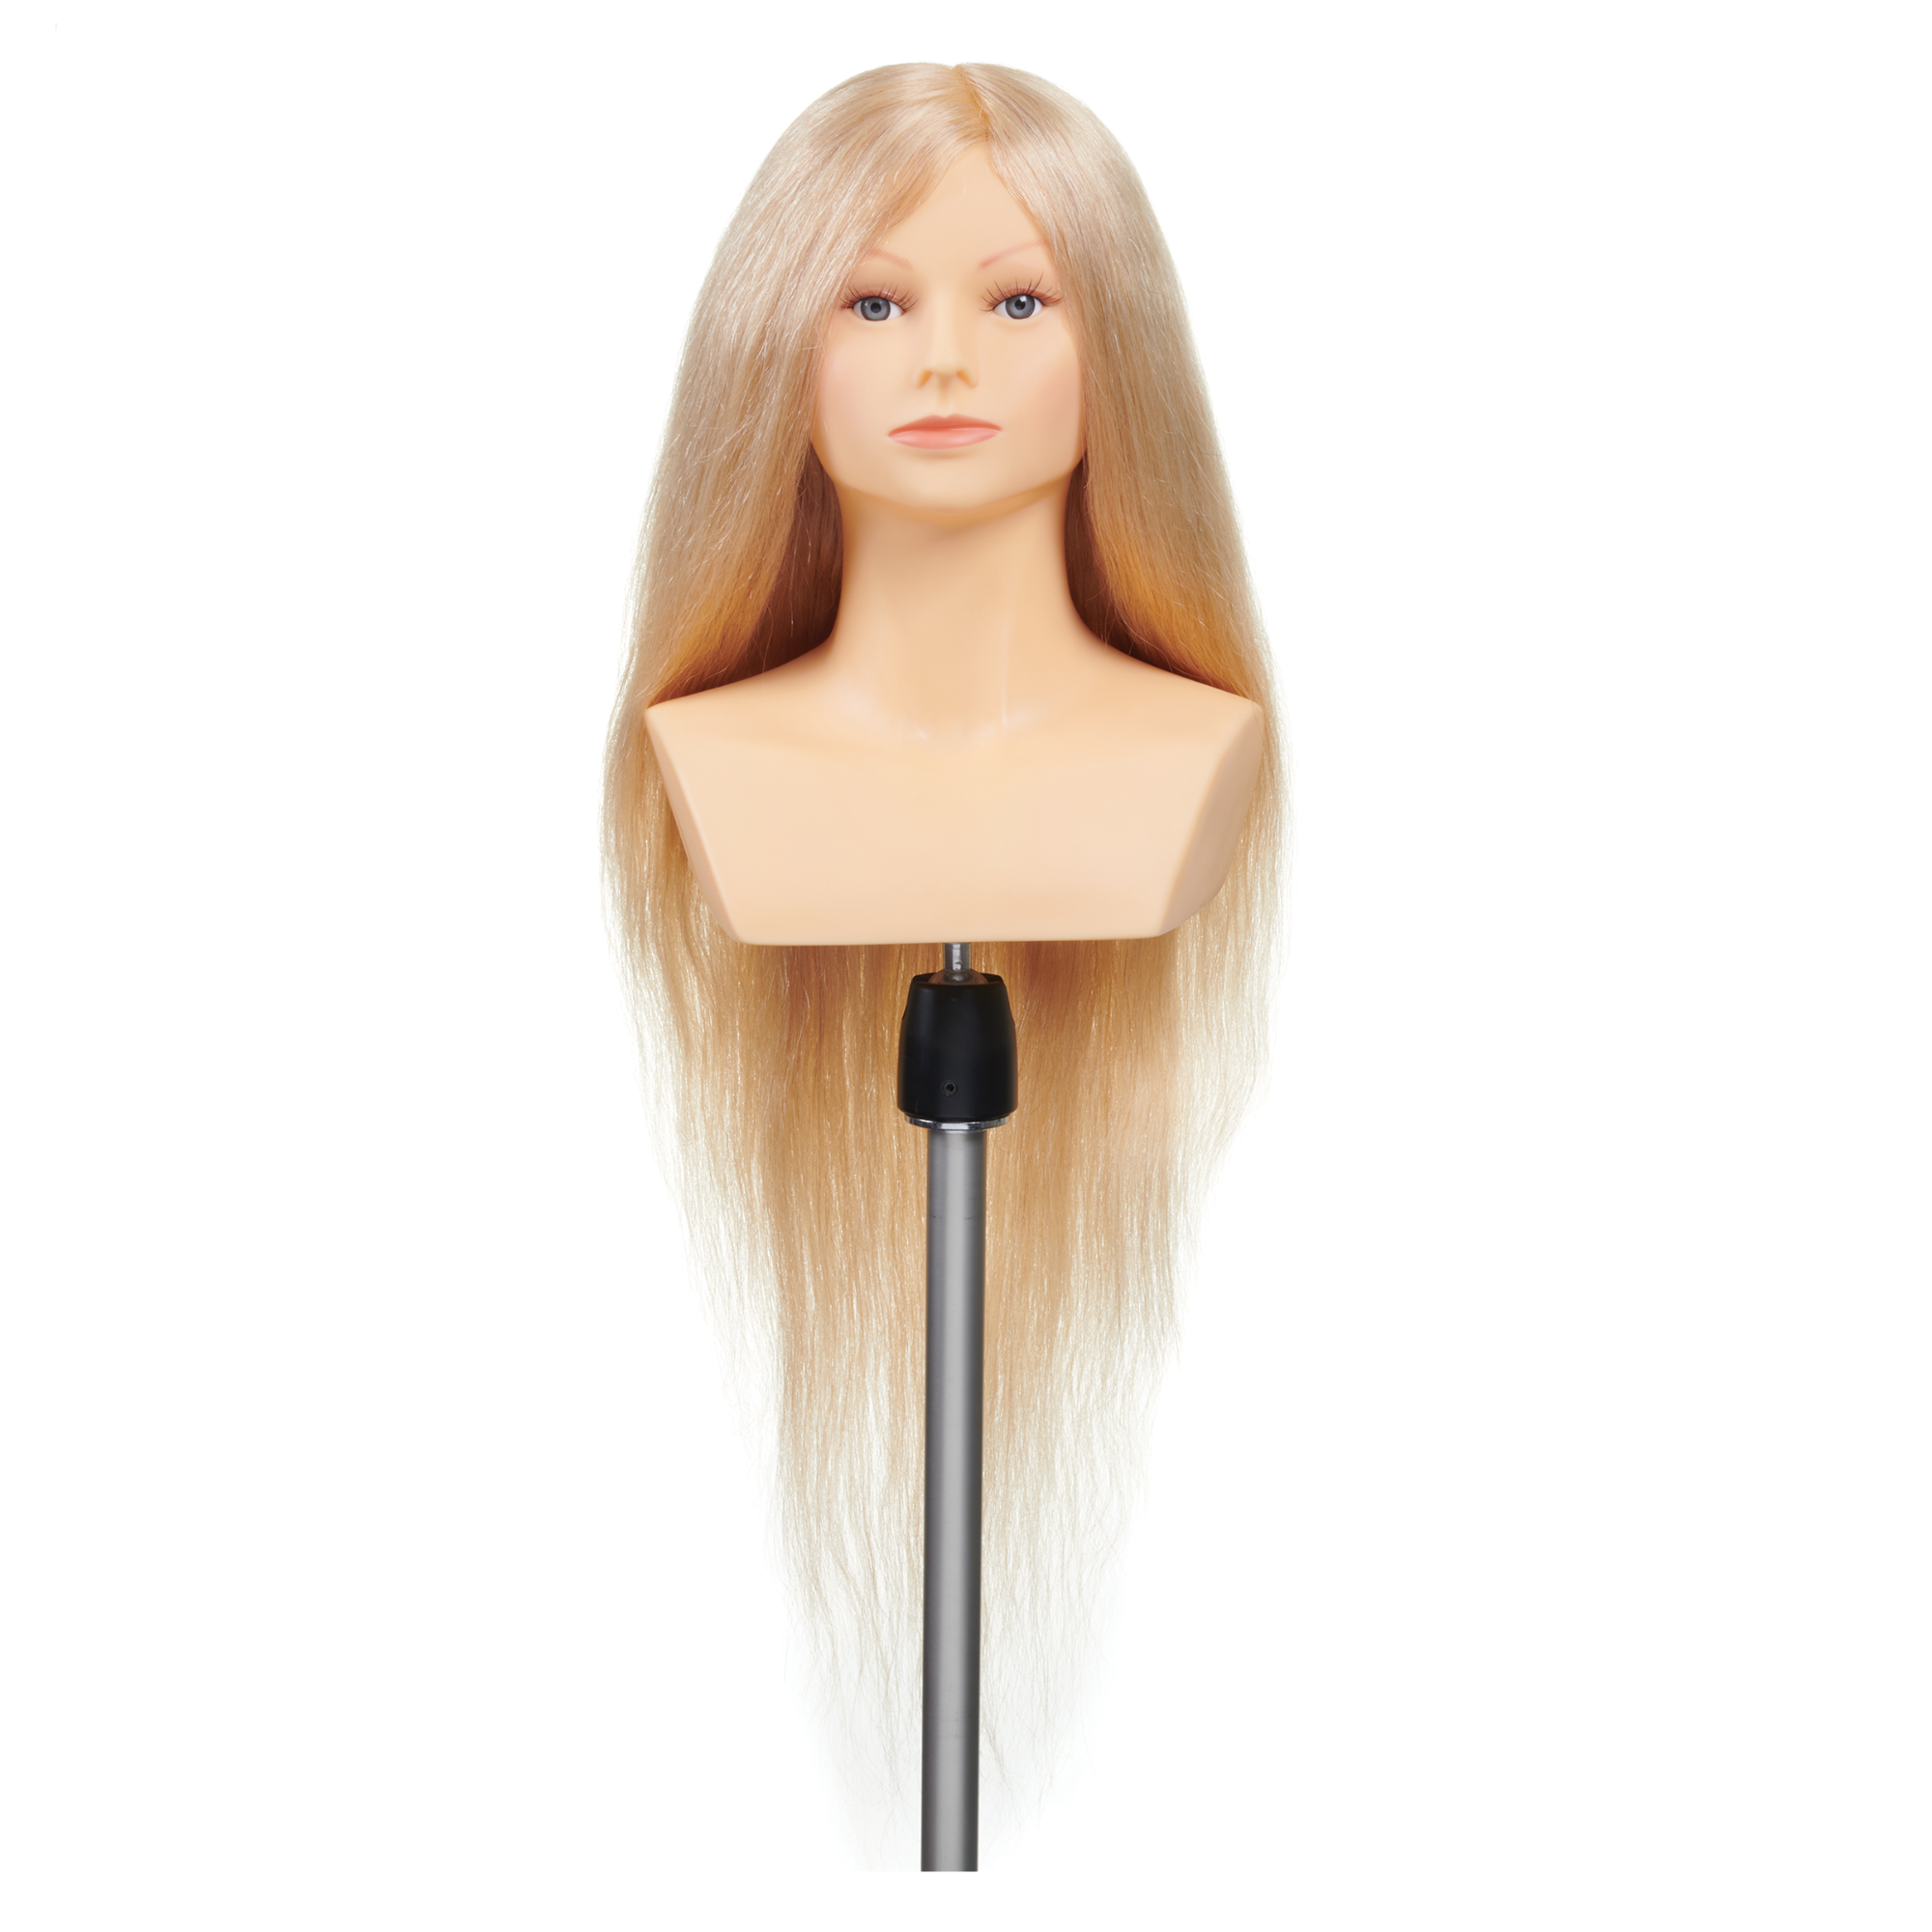 Female Competition Mannequin - 100% Human Hair